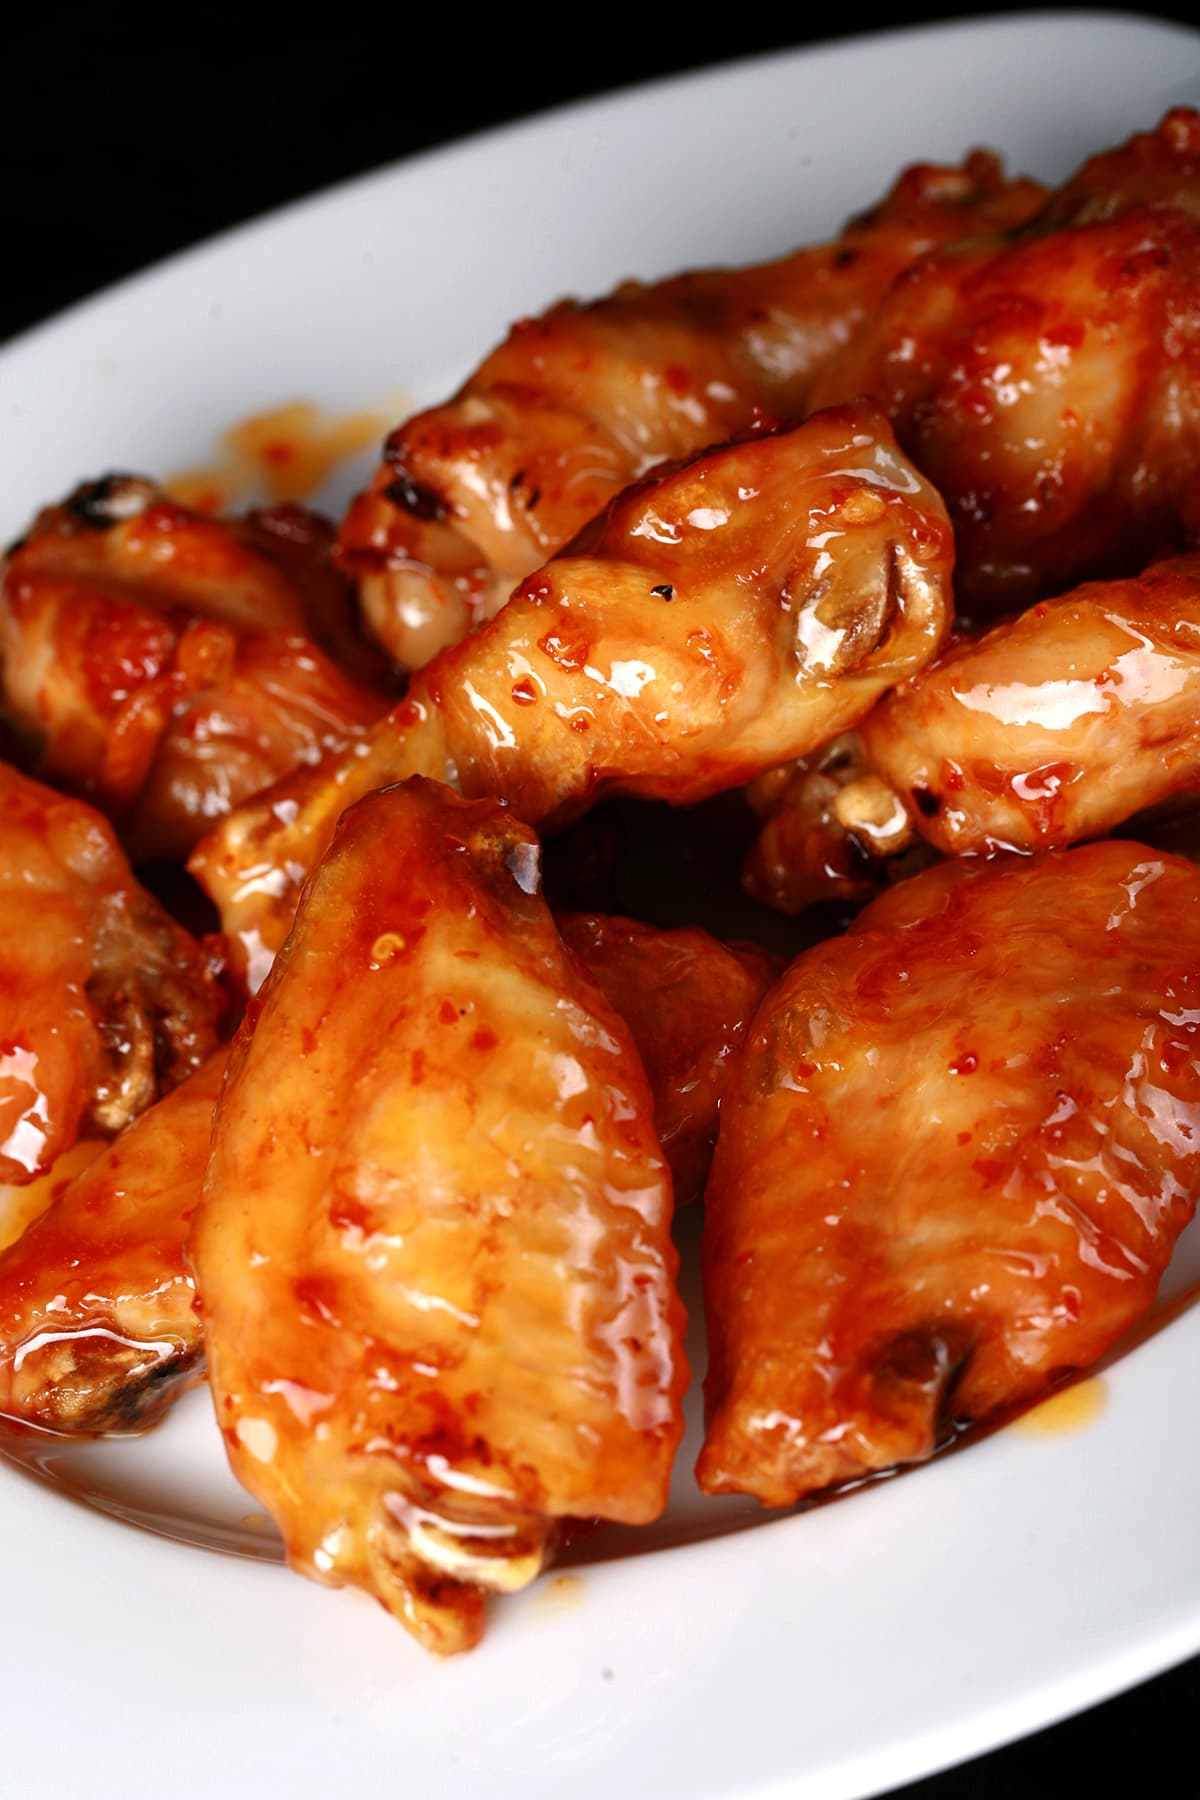 A large white plate piled with fried wings in a reddish glaze.